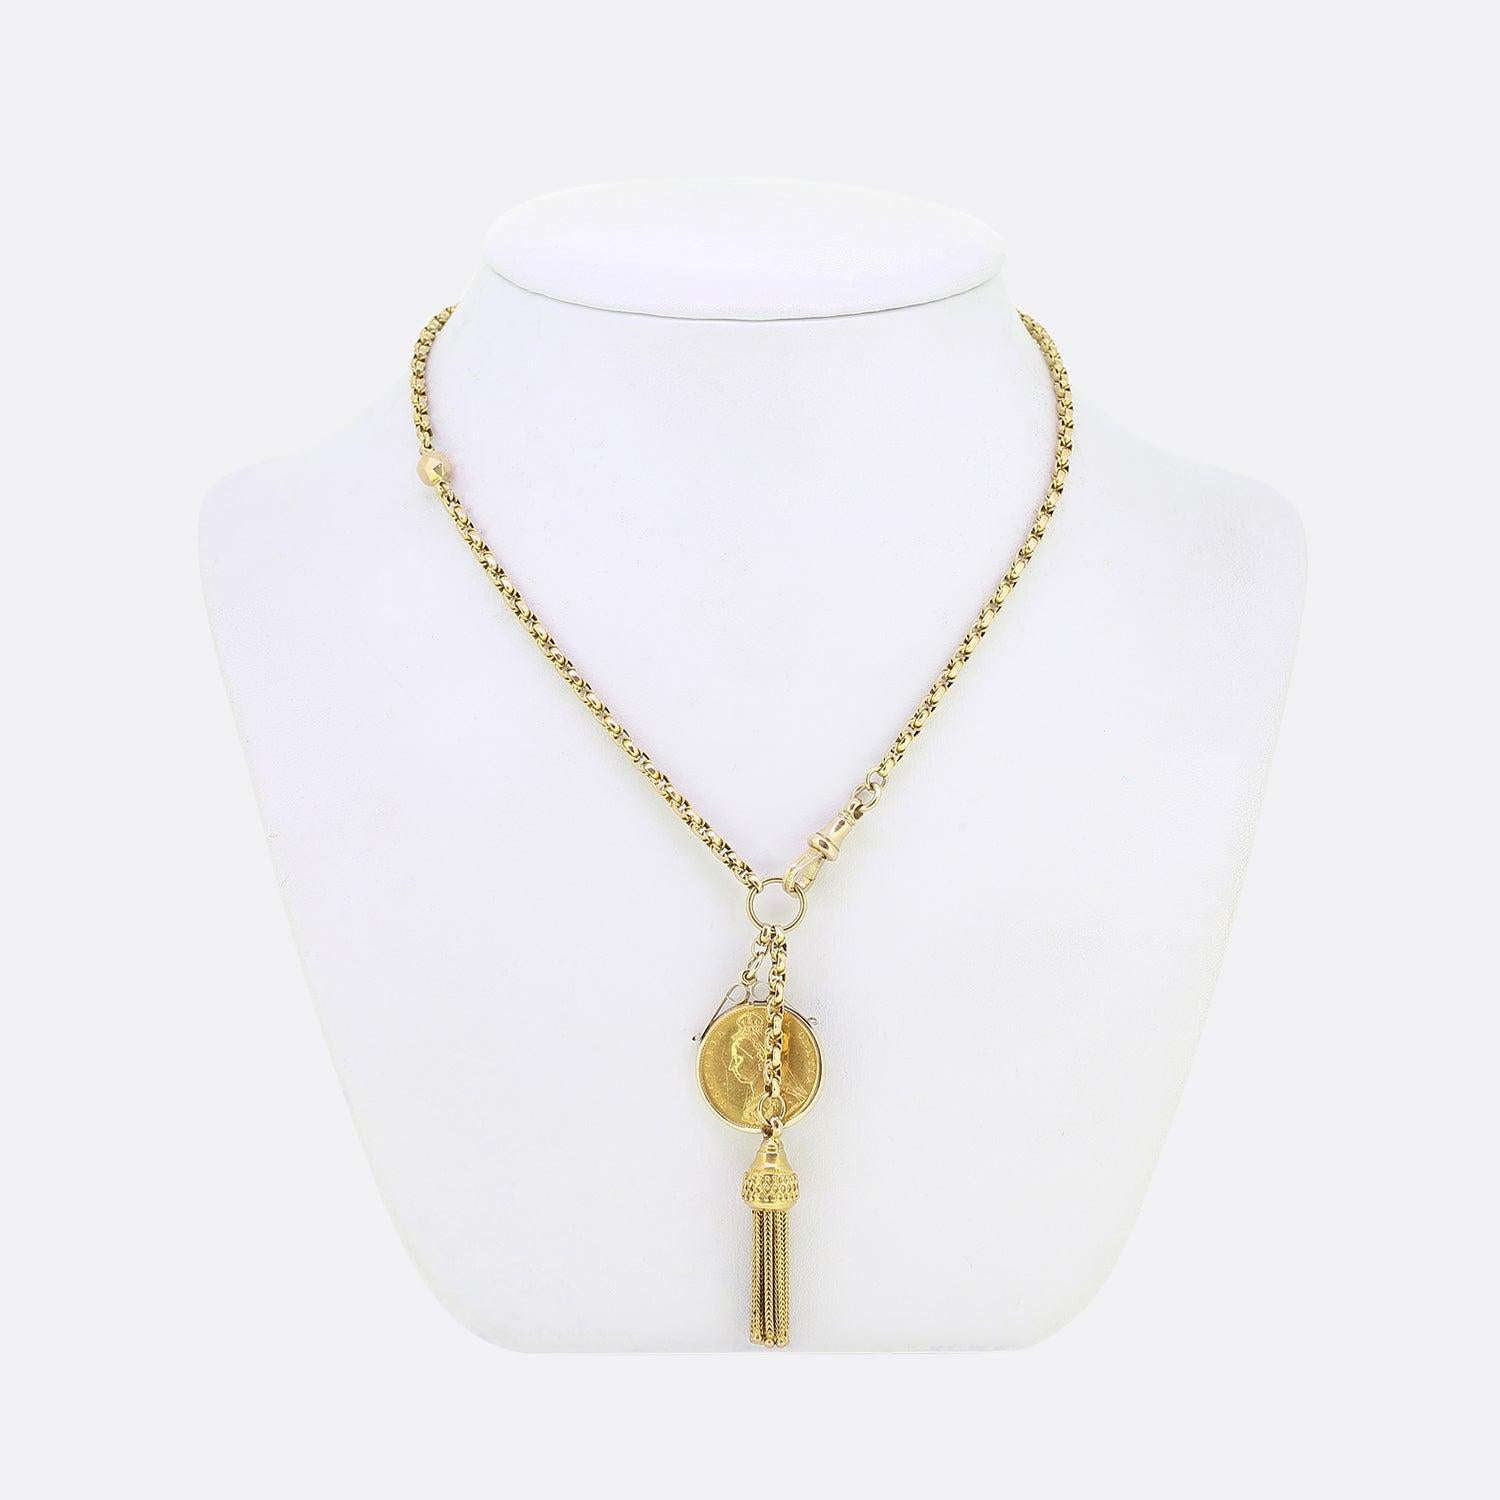 Here we have a vintage 9ct yellow gold faceted belcher chain charm necklace. The necklace plays host to a duo of pendants including an ornate freely moving tassel and a 22ct Queen Victoria Golden Jubilee (1887) half-sovereign coin with shield on the